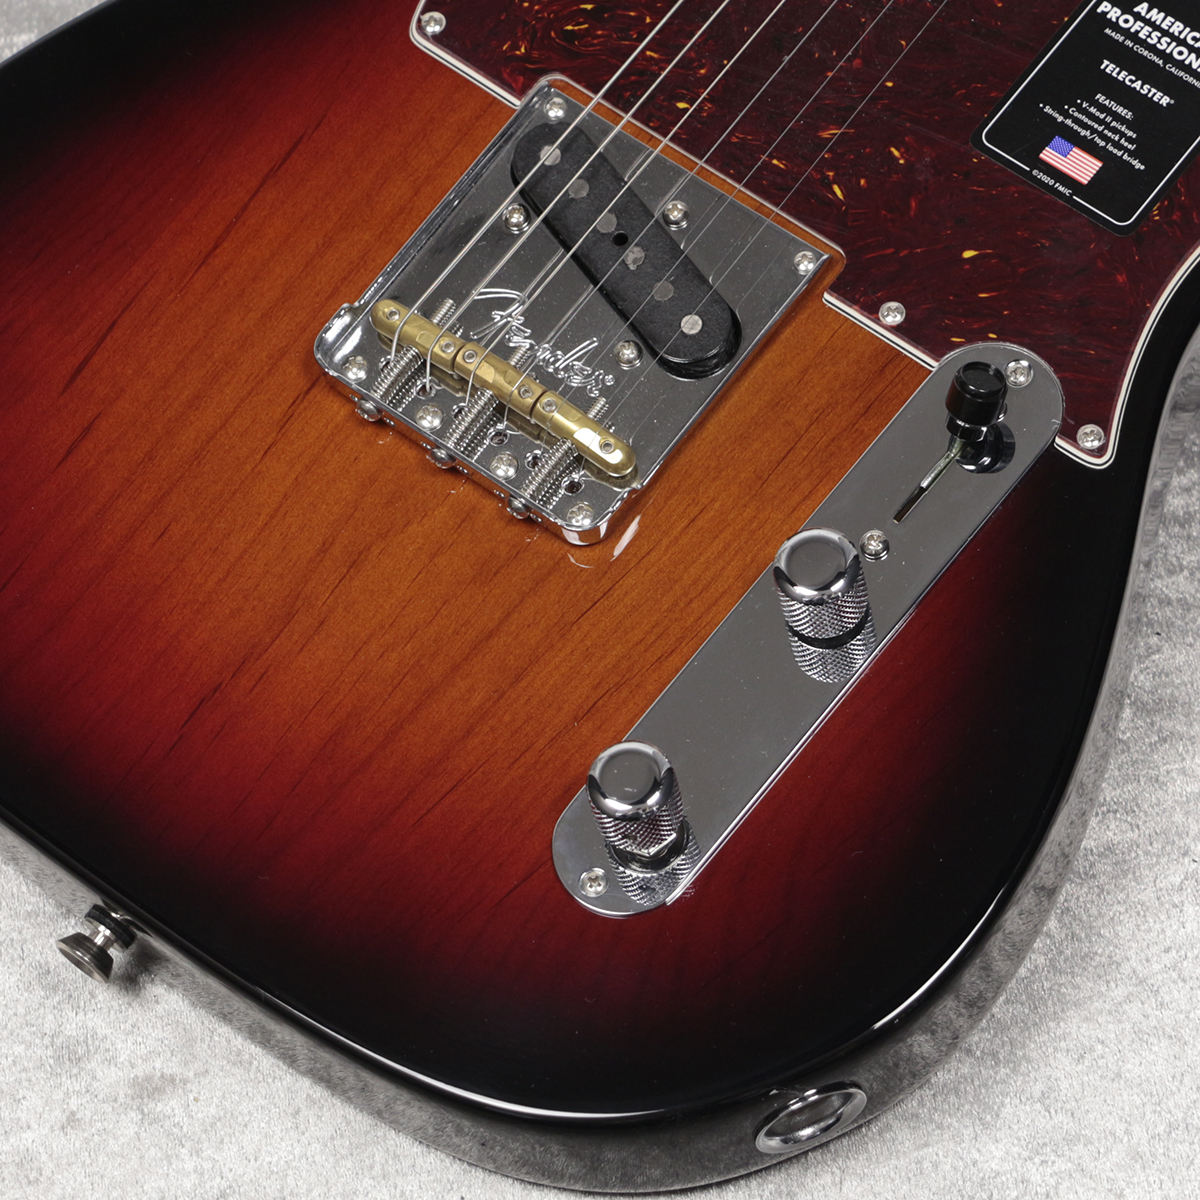 Fender / American Professional II Telecaster Maple 3-Color